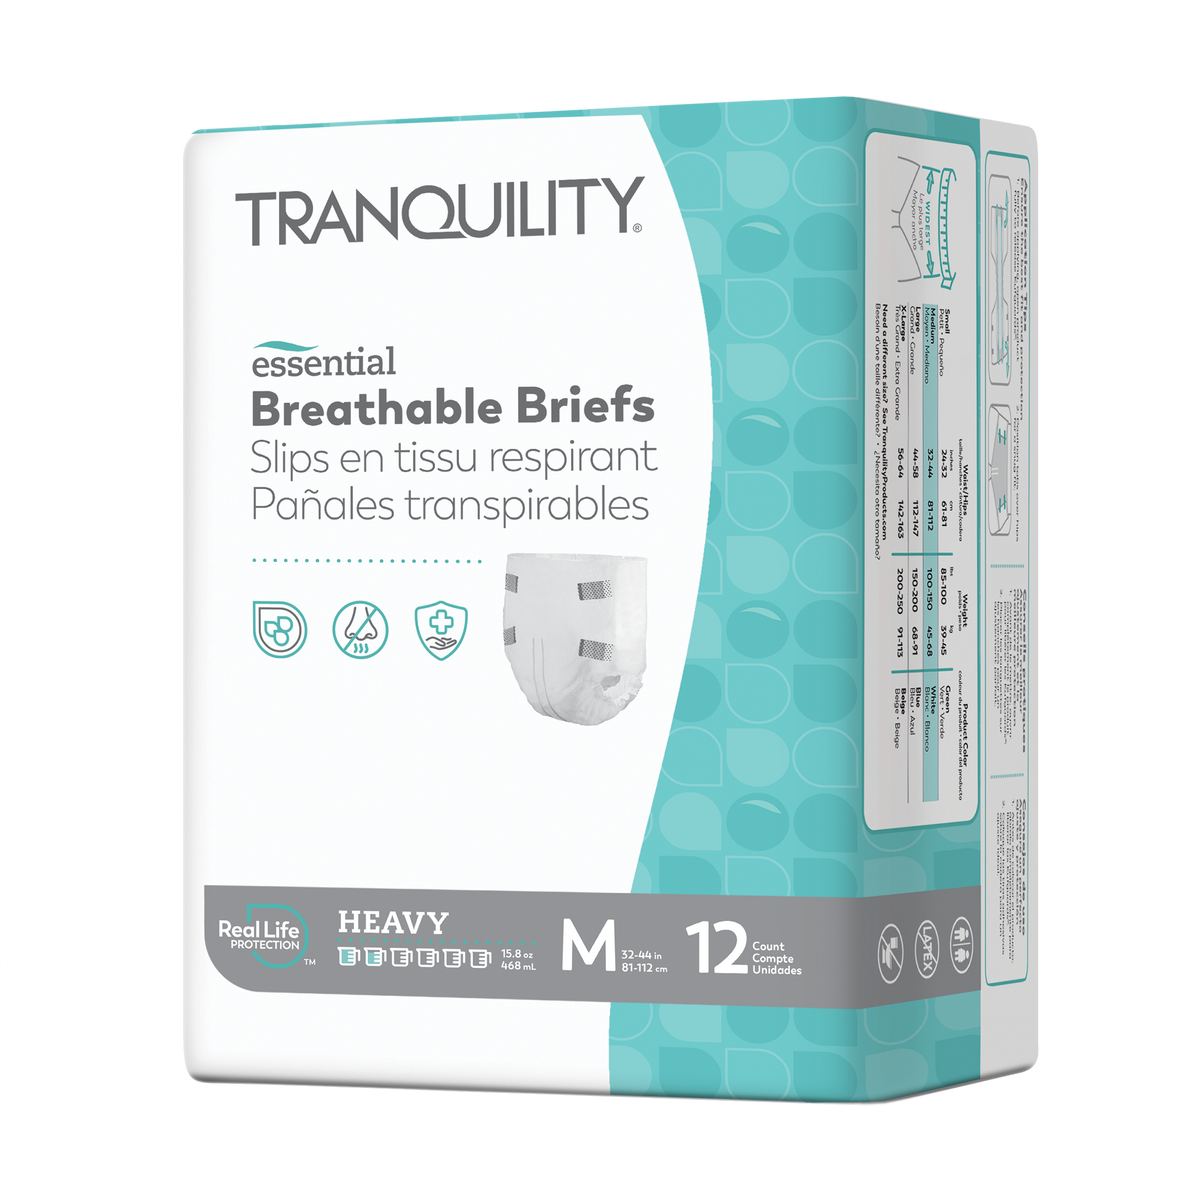 Buy Tranquility Atn Disposable Briefs S Canada